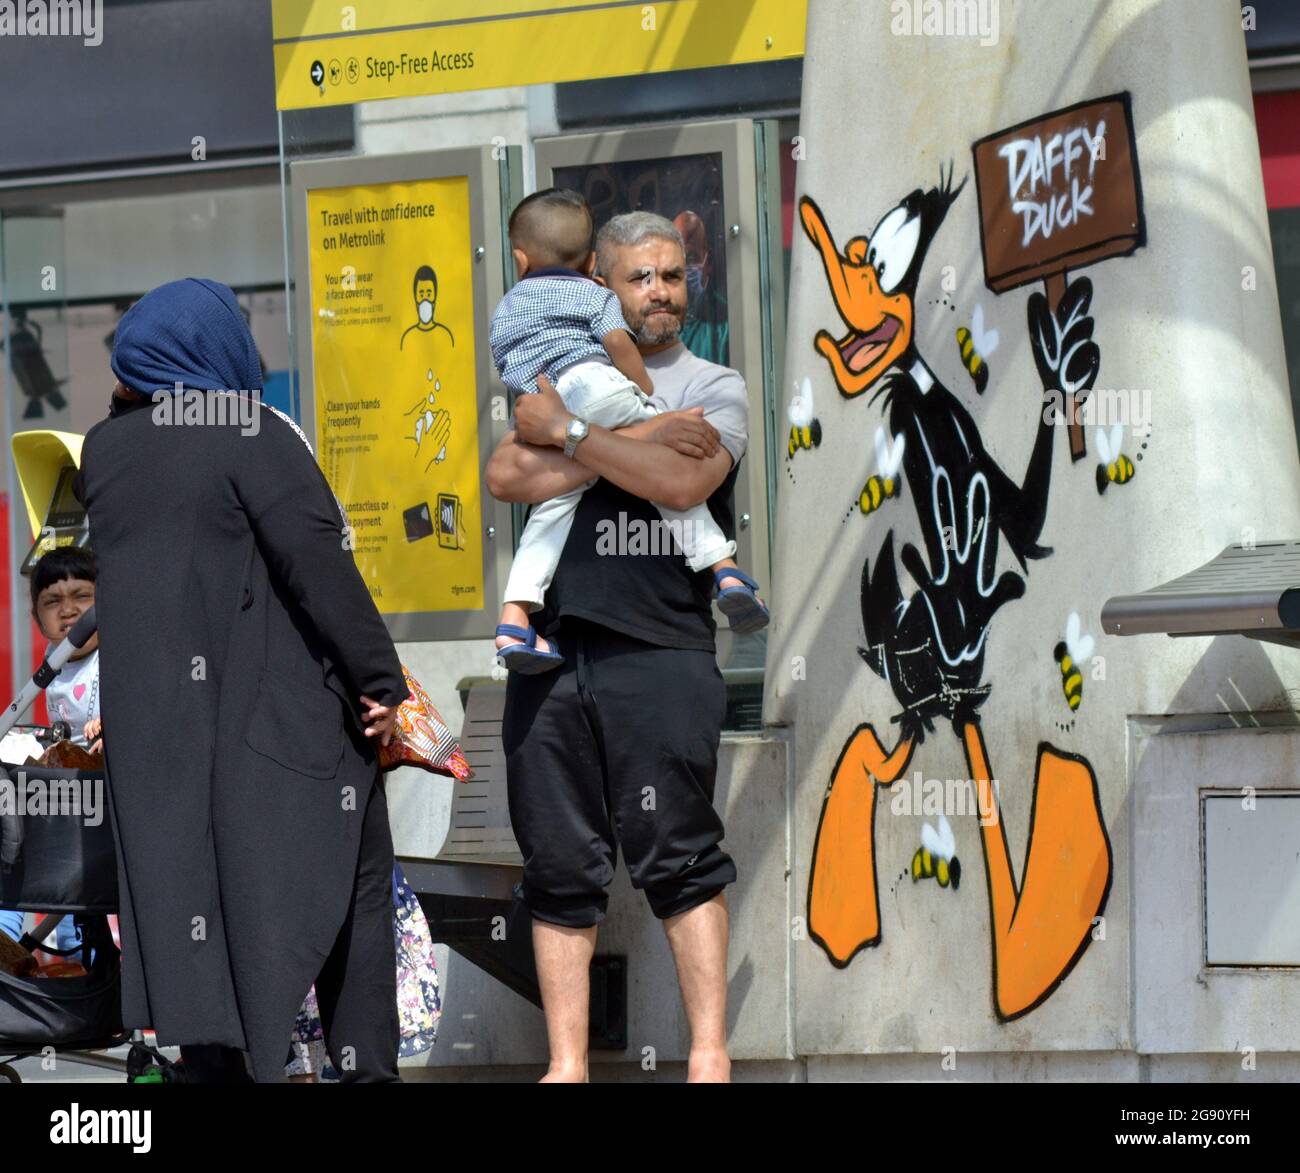 A man stands holding a baby next to an image of Daffy Duck cartoon character, part of a Looney Tunes art trail which has opened in Manchester, England. Stock Photo